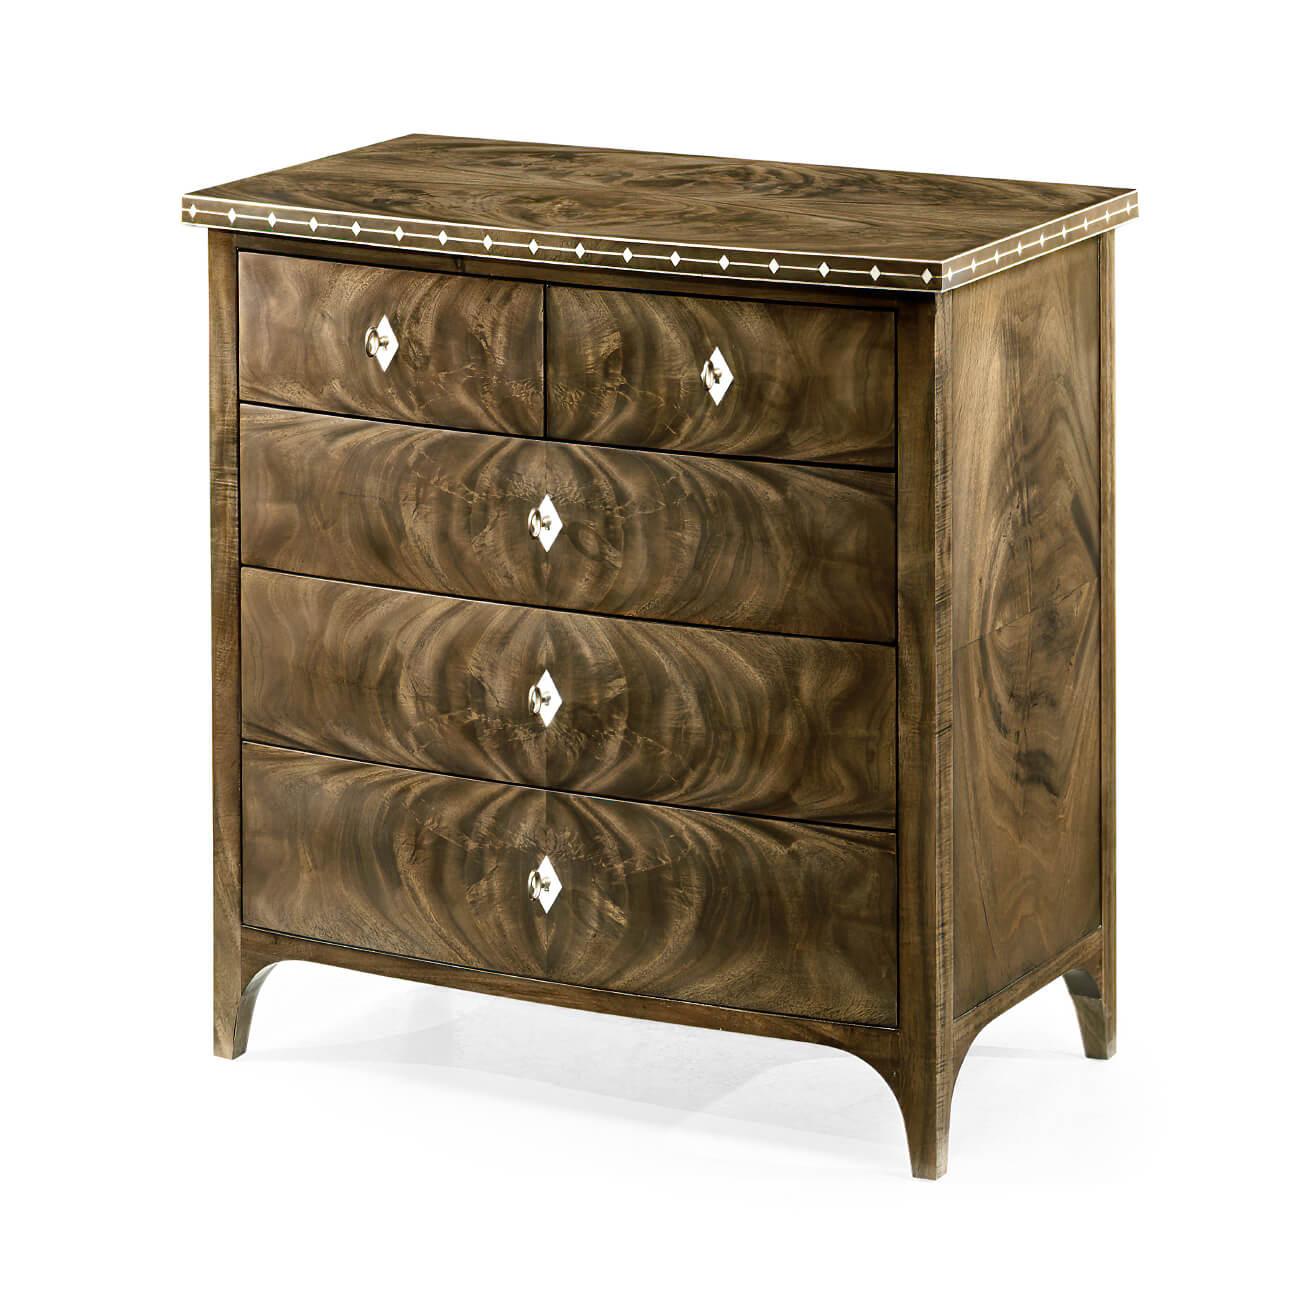 Modern Georgian bleached mahogany bow front bone inlaid chest of drawers, with five graduated drawers, diamond inlay escutcheons, figured mahogany, paneled sides and French bracket feet.

Dimensions: 28.75